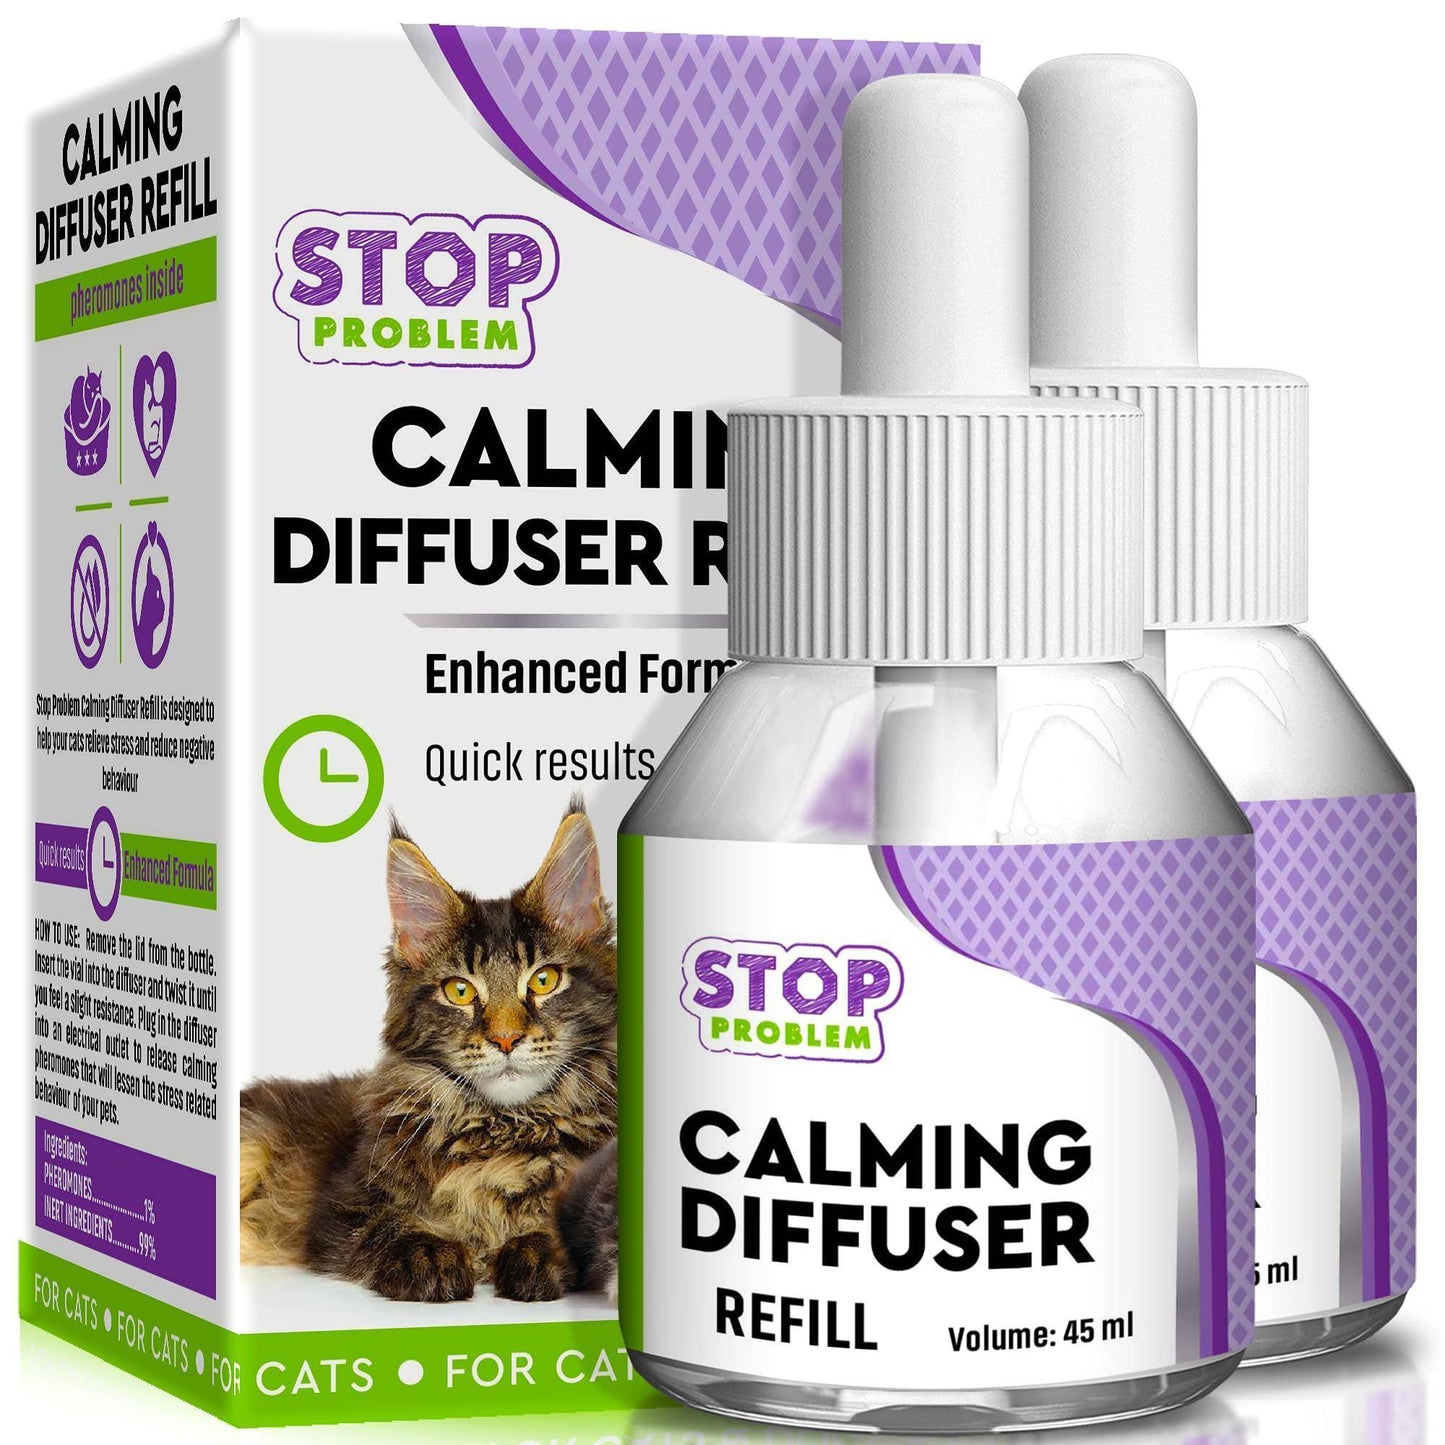 Pheromone Calming Diffuser Refill 2 Pack for Cats with Long Lasting Relax Effect Enhanced Formula of Anxiety Relief Stress Prevention for Pets Diffuser not Included